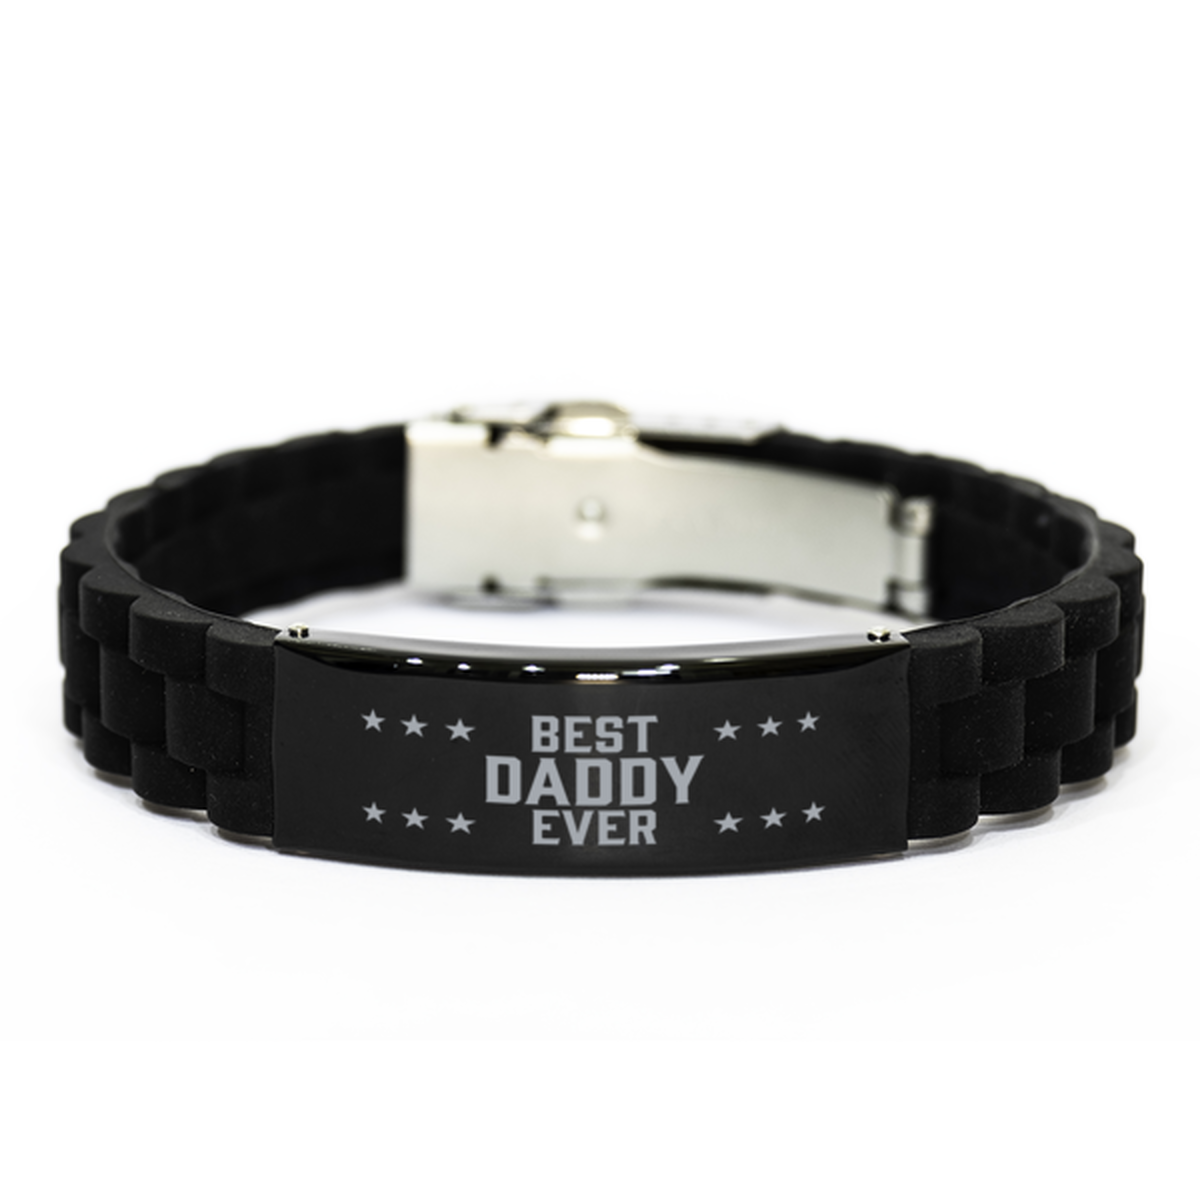 Best Daddy Ever Daddy Gifts, Funny Black Engraved Bracelet For Daddy, Family Gifts For Men